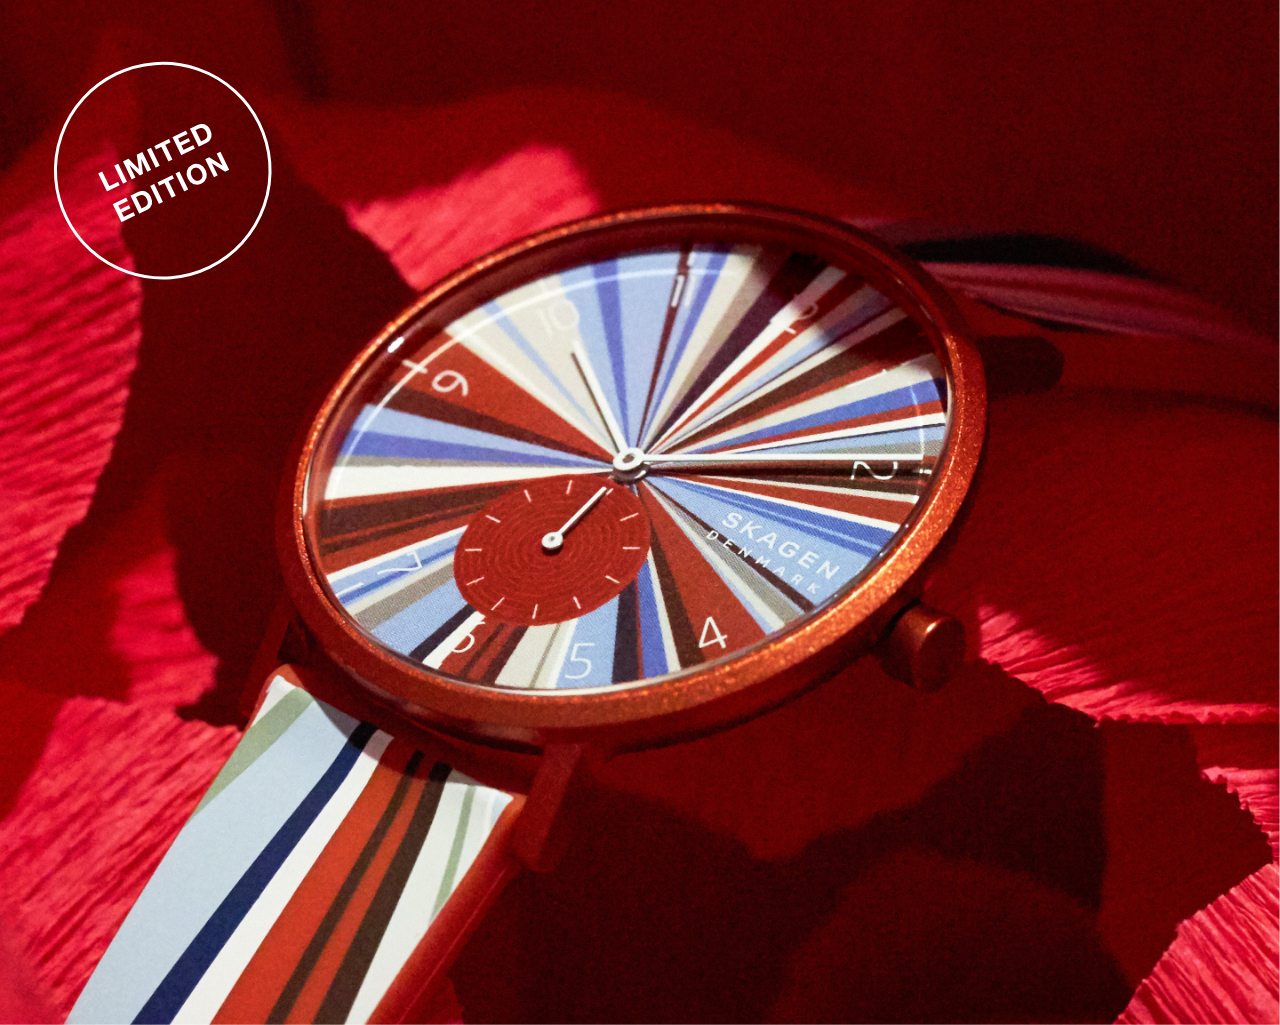 Limited Edition Red Colorburst watch uniquely multicolored—primarly in tones of red and white.